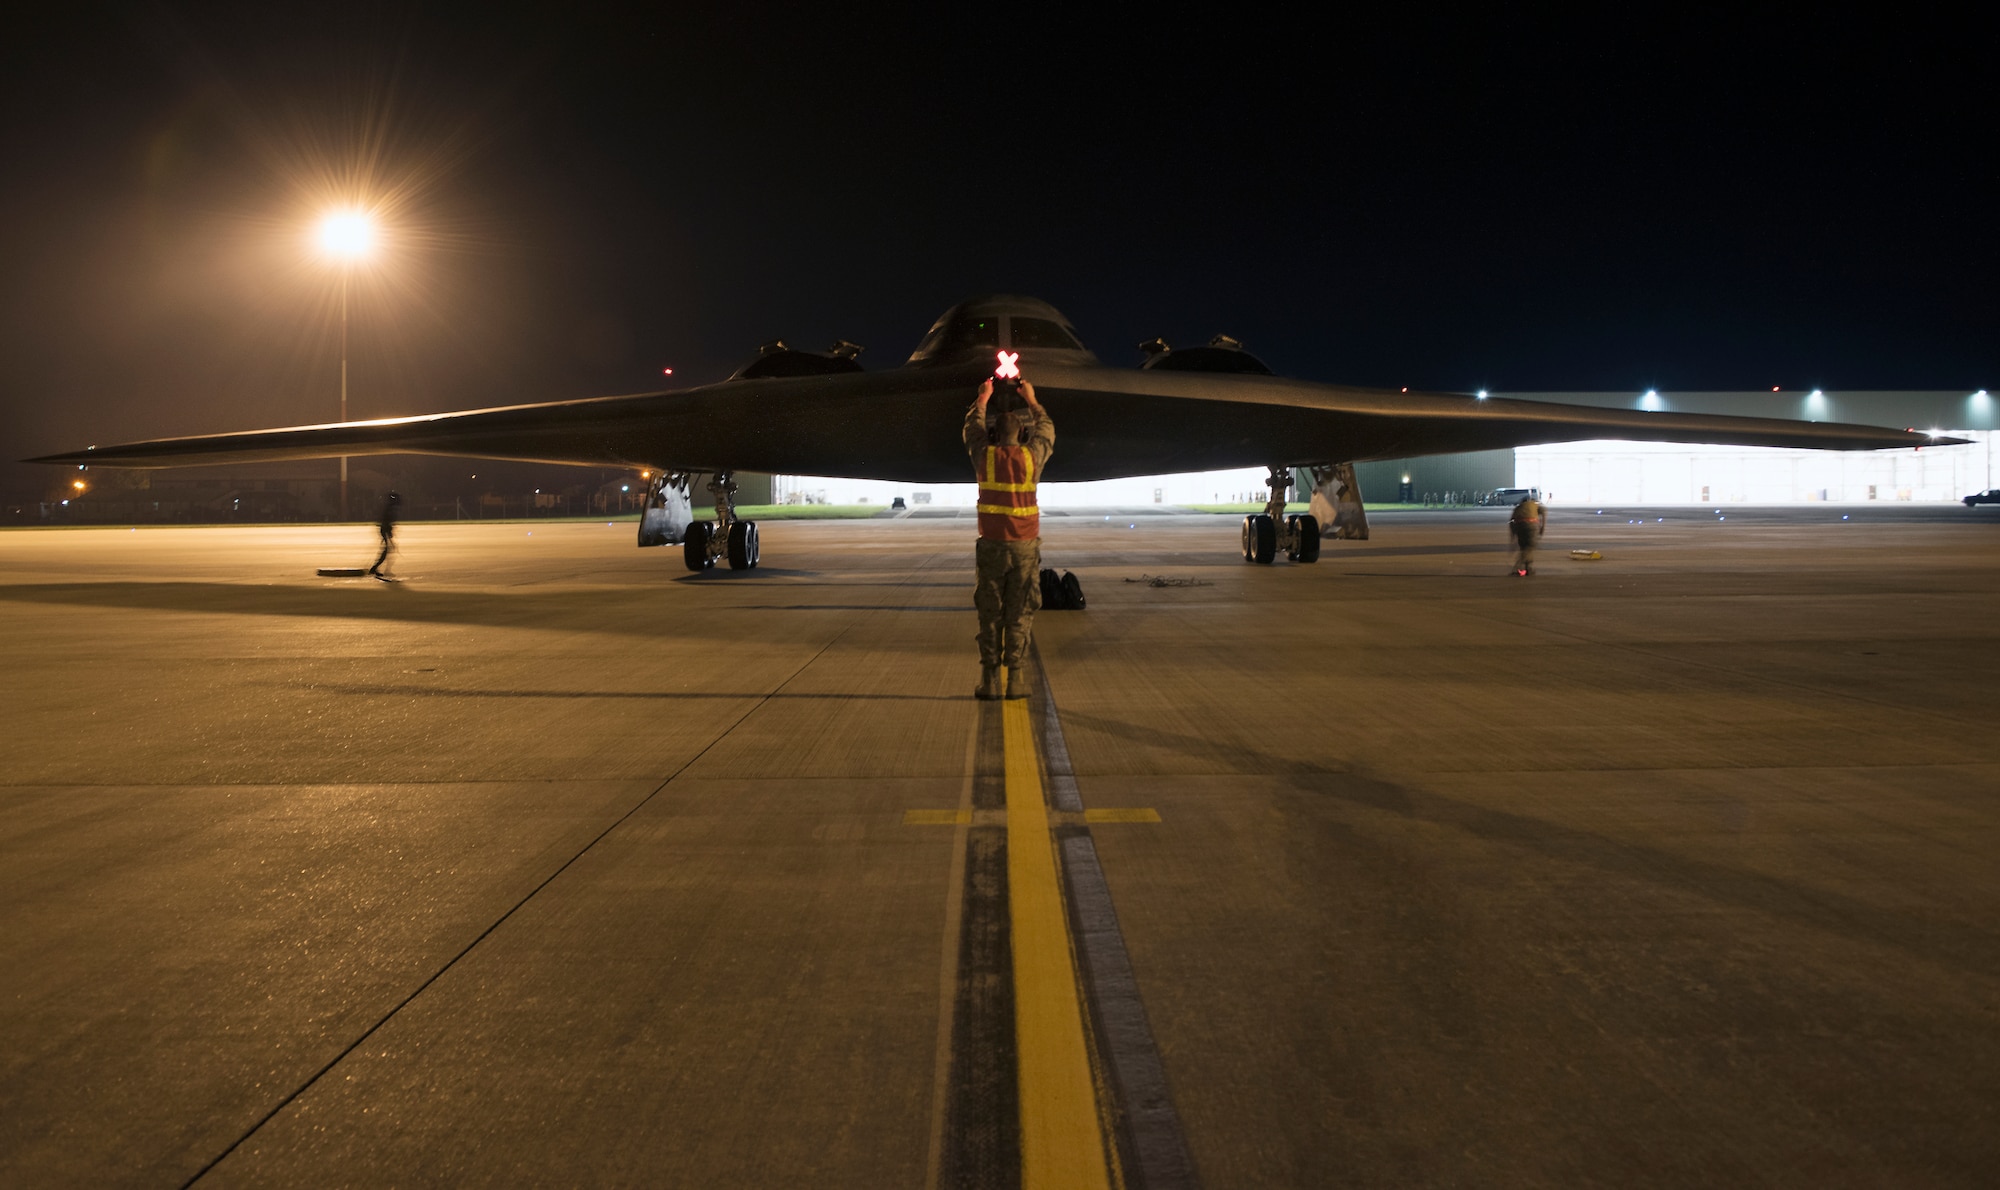 Airman 1st Class Austin Sawchuk, a crew chief assigned to the 509th Bomb Wing, marshals in a B-2 Spirit on the flightline at Royal Air Force Fairford, England, Aug. 27, 2019. A Bomber Task Force deployment of the B-2, Airmen and support equipment from Whiteman AFB arrived in the U.S. European Command area of operations for a deployment to conduct theater integration and flying training. The deployment of strategic bombers to the United Kingdom helps exercise RAF Fairford as a forward operating base for the unit, ensuring they are engaged, postured and ready with credible force to assure, deter and defend the U.S. and its allies in an increasingly complex security environment. (U.S. Air Force photo by Staff Sgt. Kayla White)